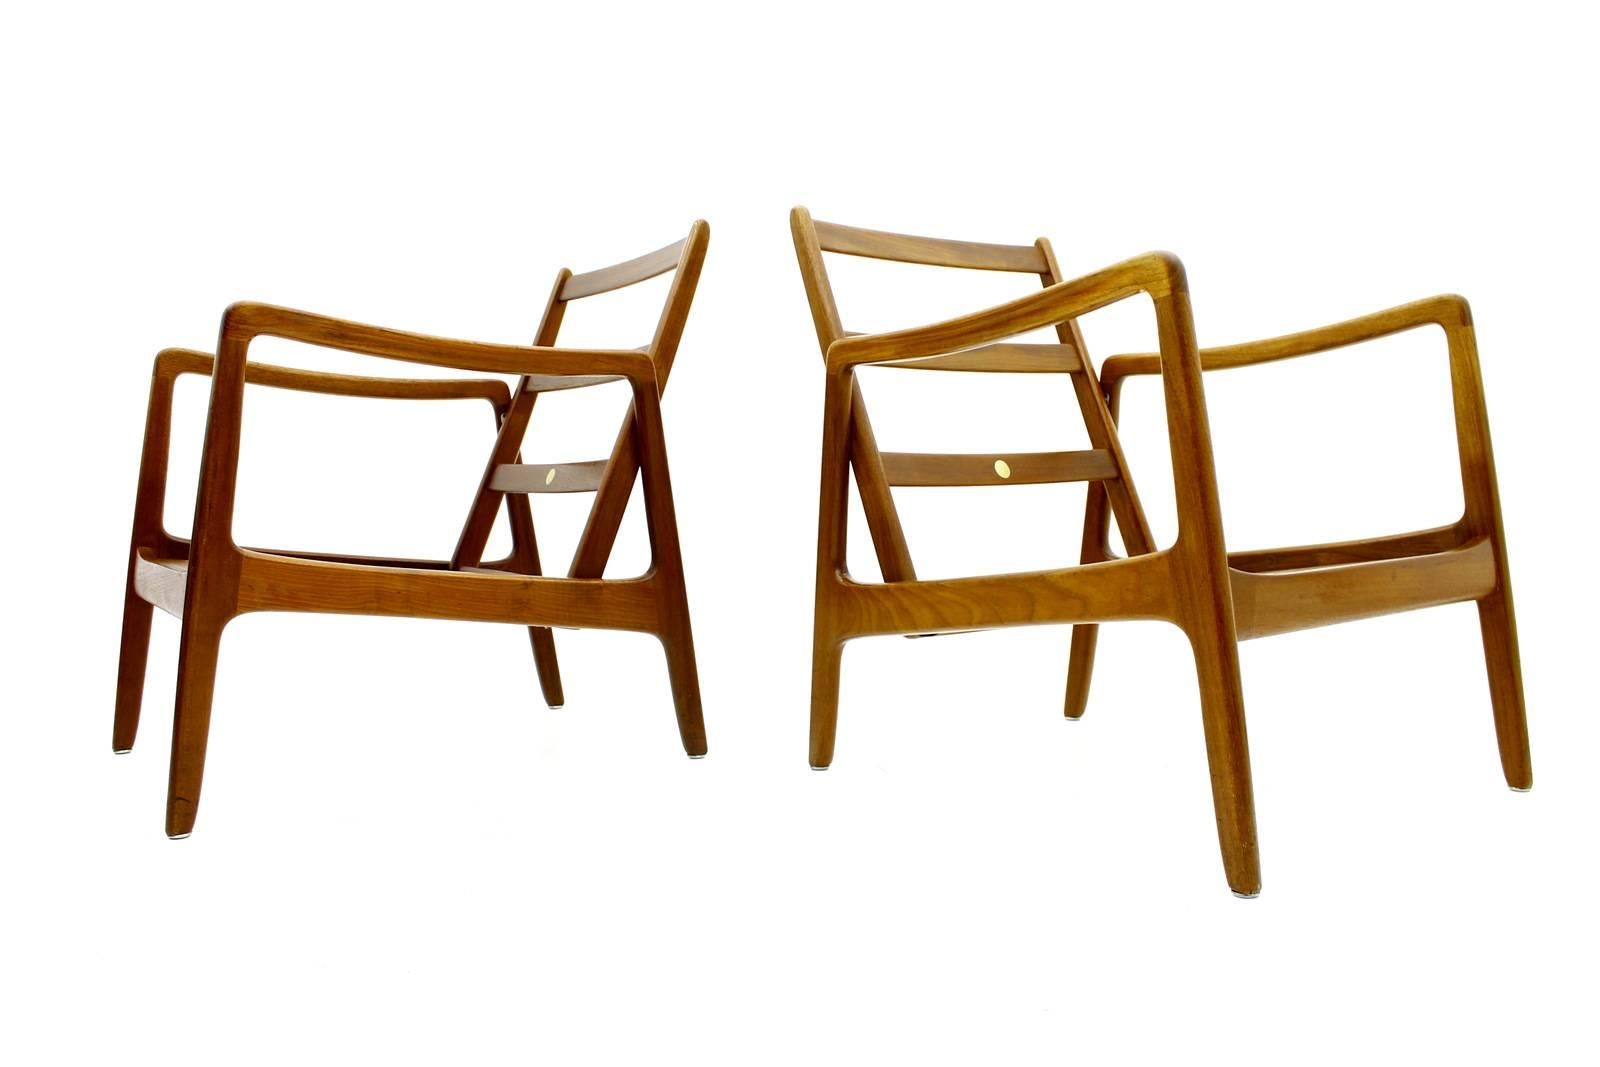 Nice Pair Teak Easy Chairs FD 109 by Ole Wanscher 1956.
Very good condition.

Worldwide shipping.